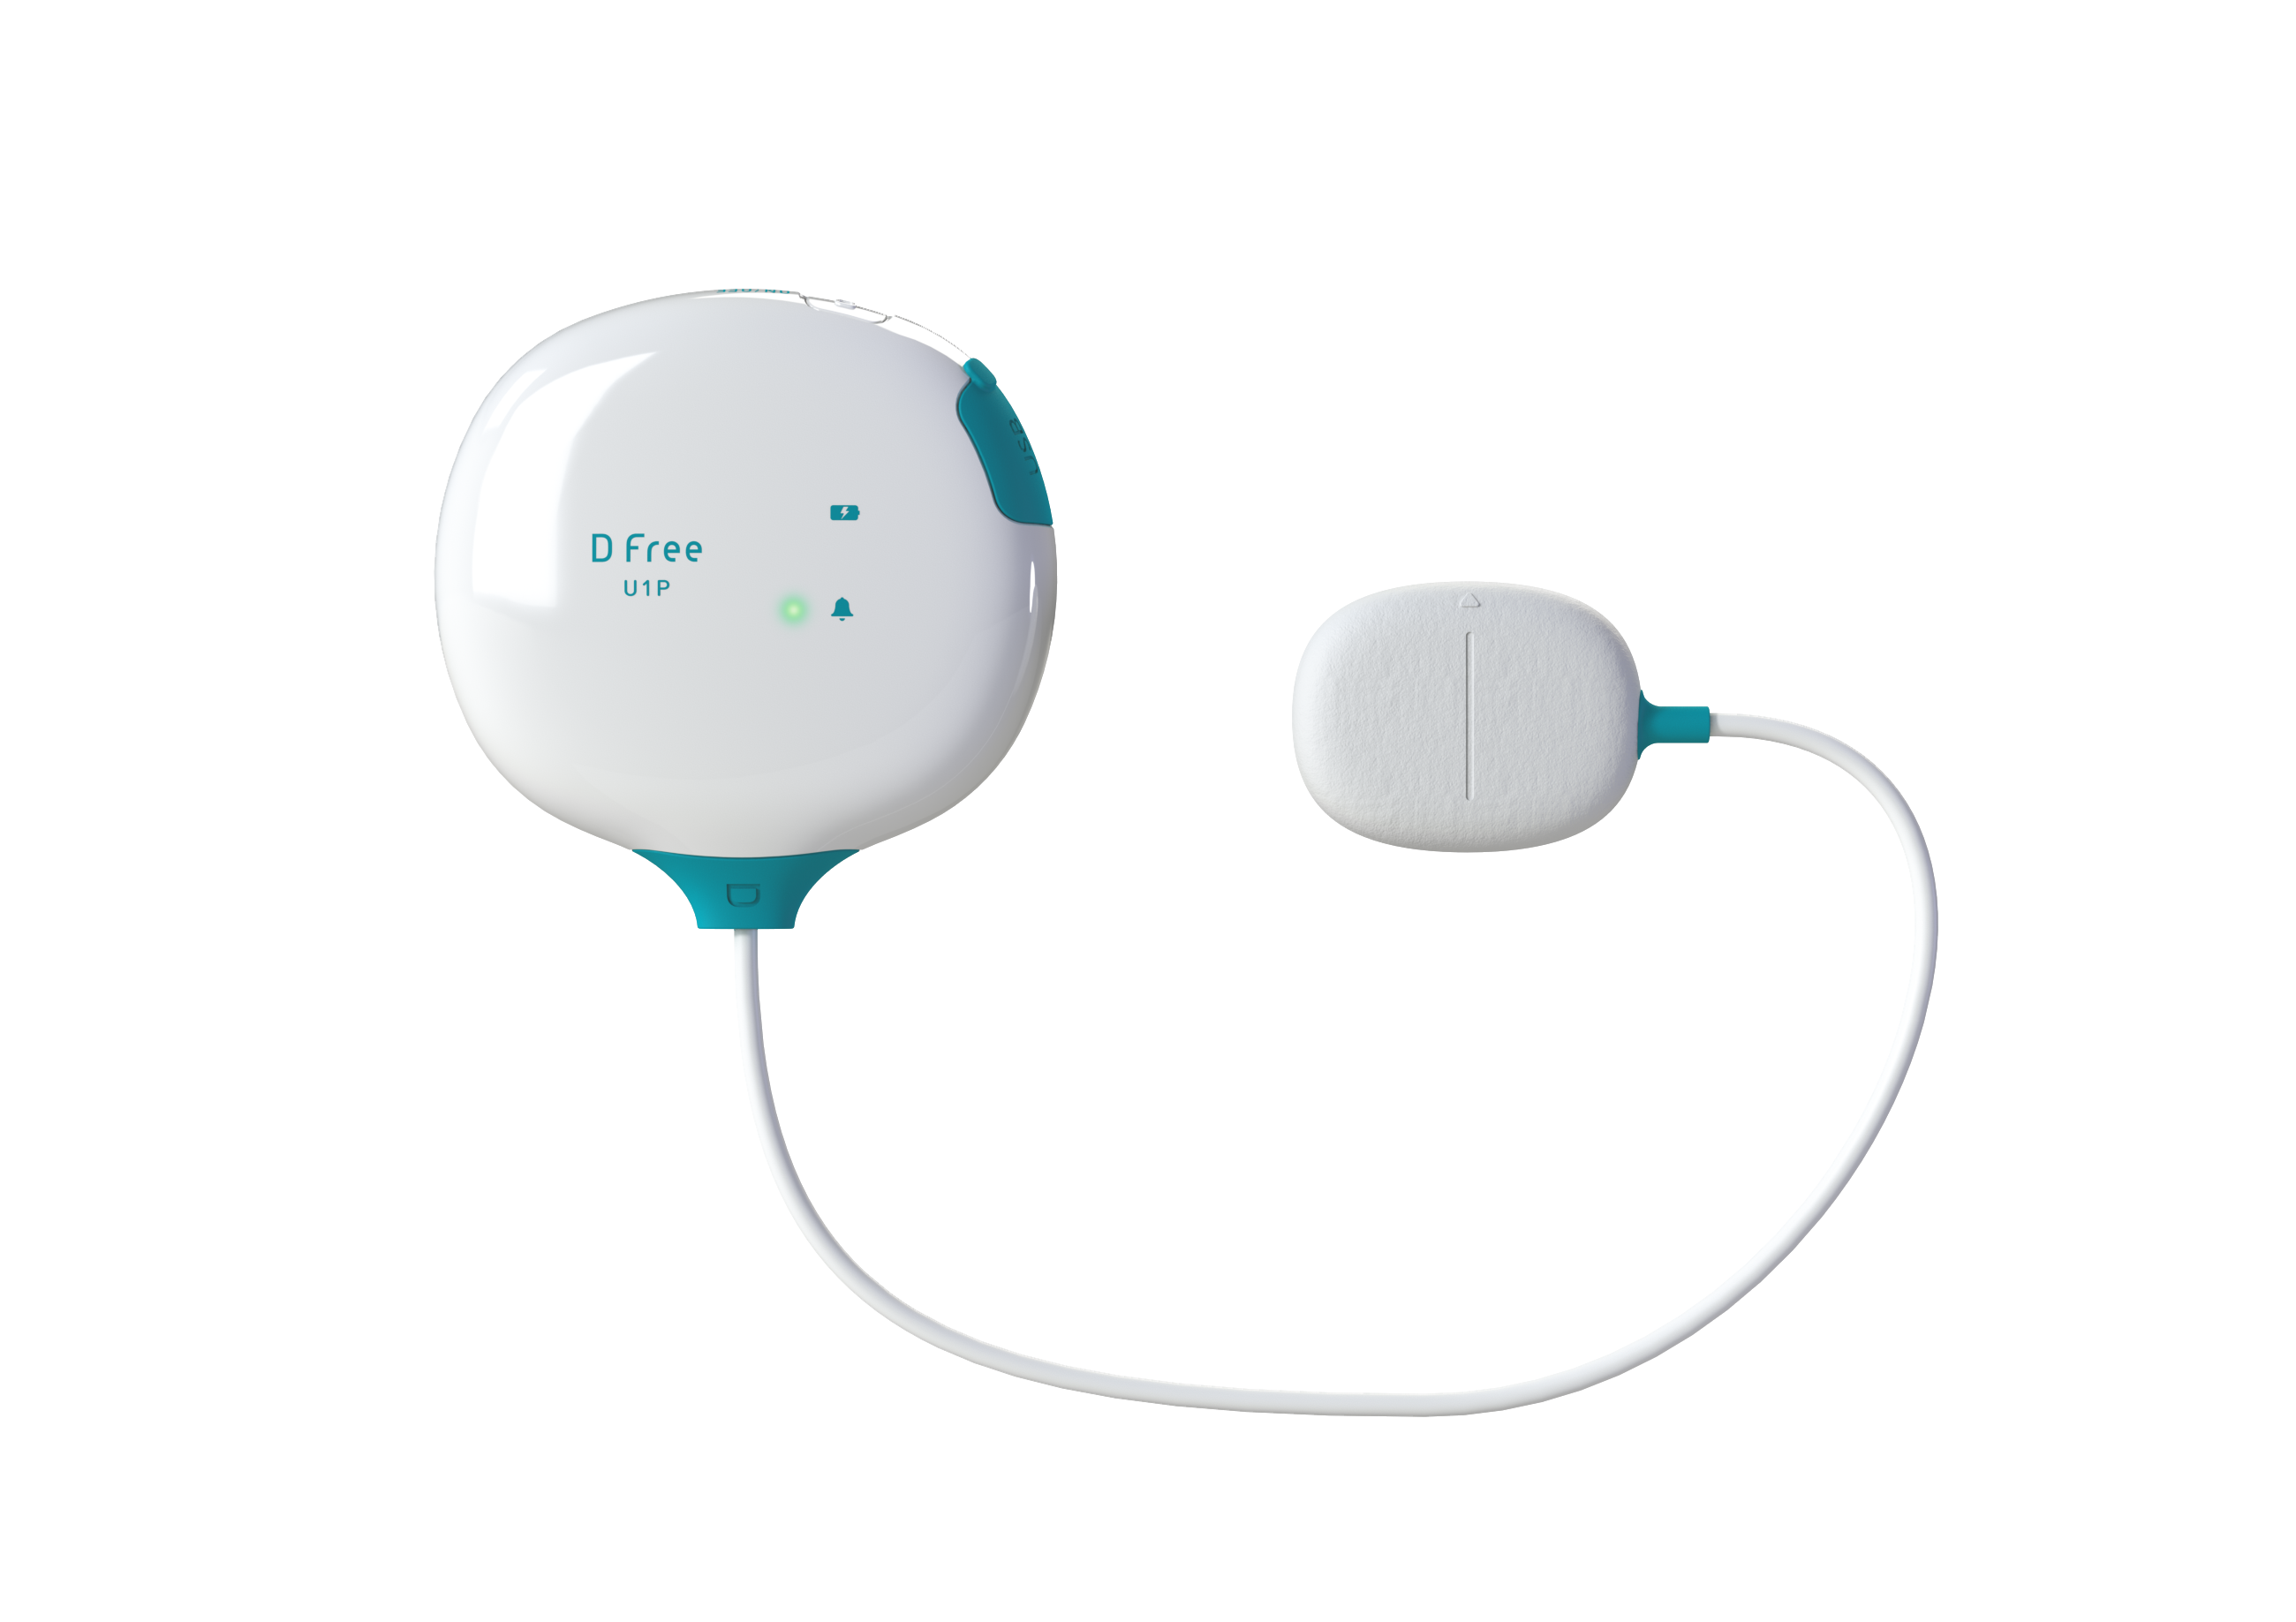 DFree is the first wearable device for incontinence that notifies the user when it’s time to go to the bathroom via Bluetooth® to a smartphone or tablet via the DFree app.